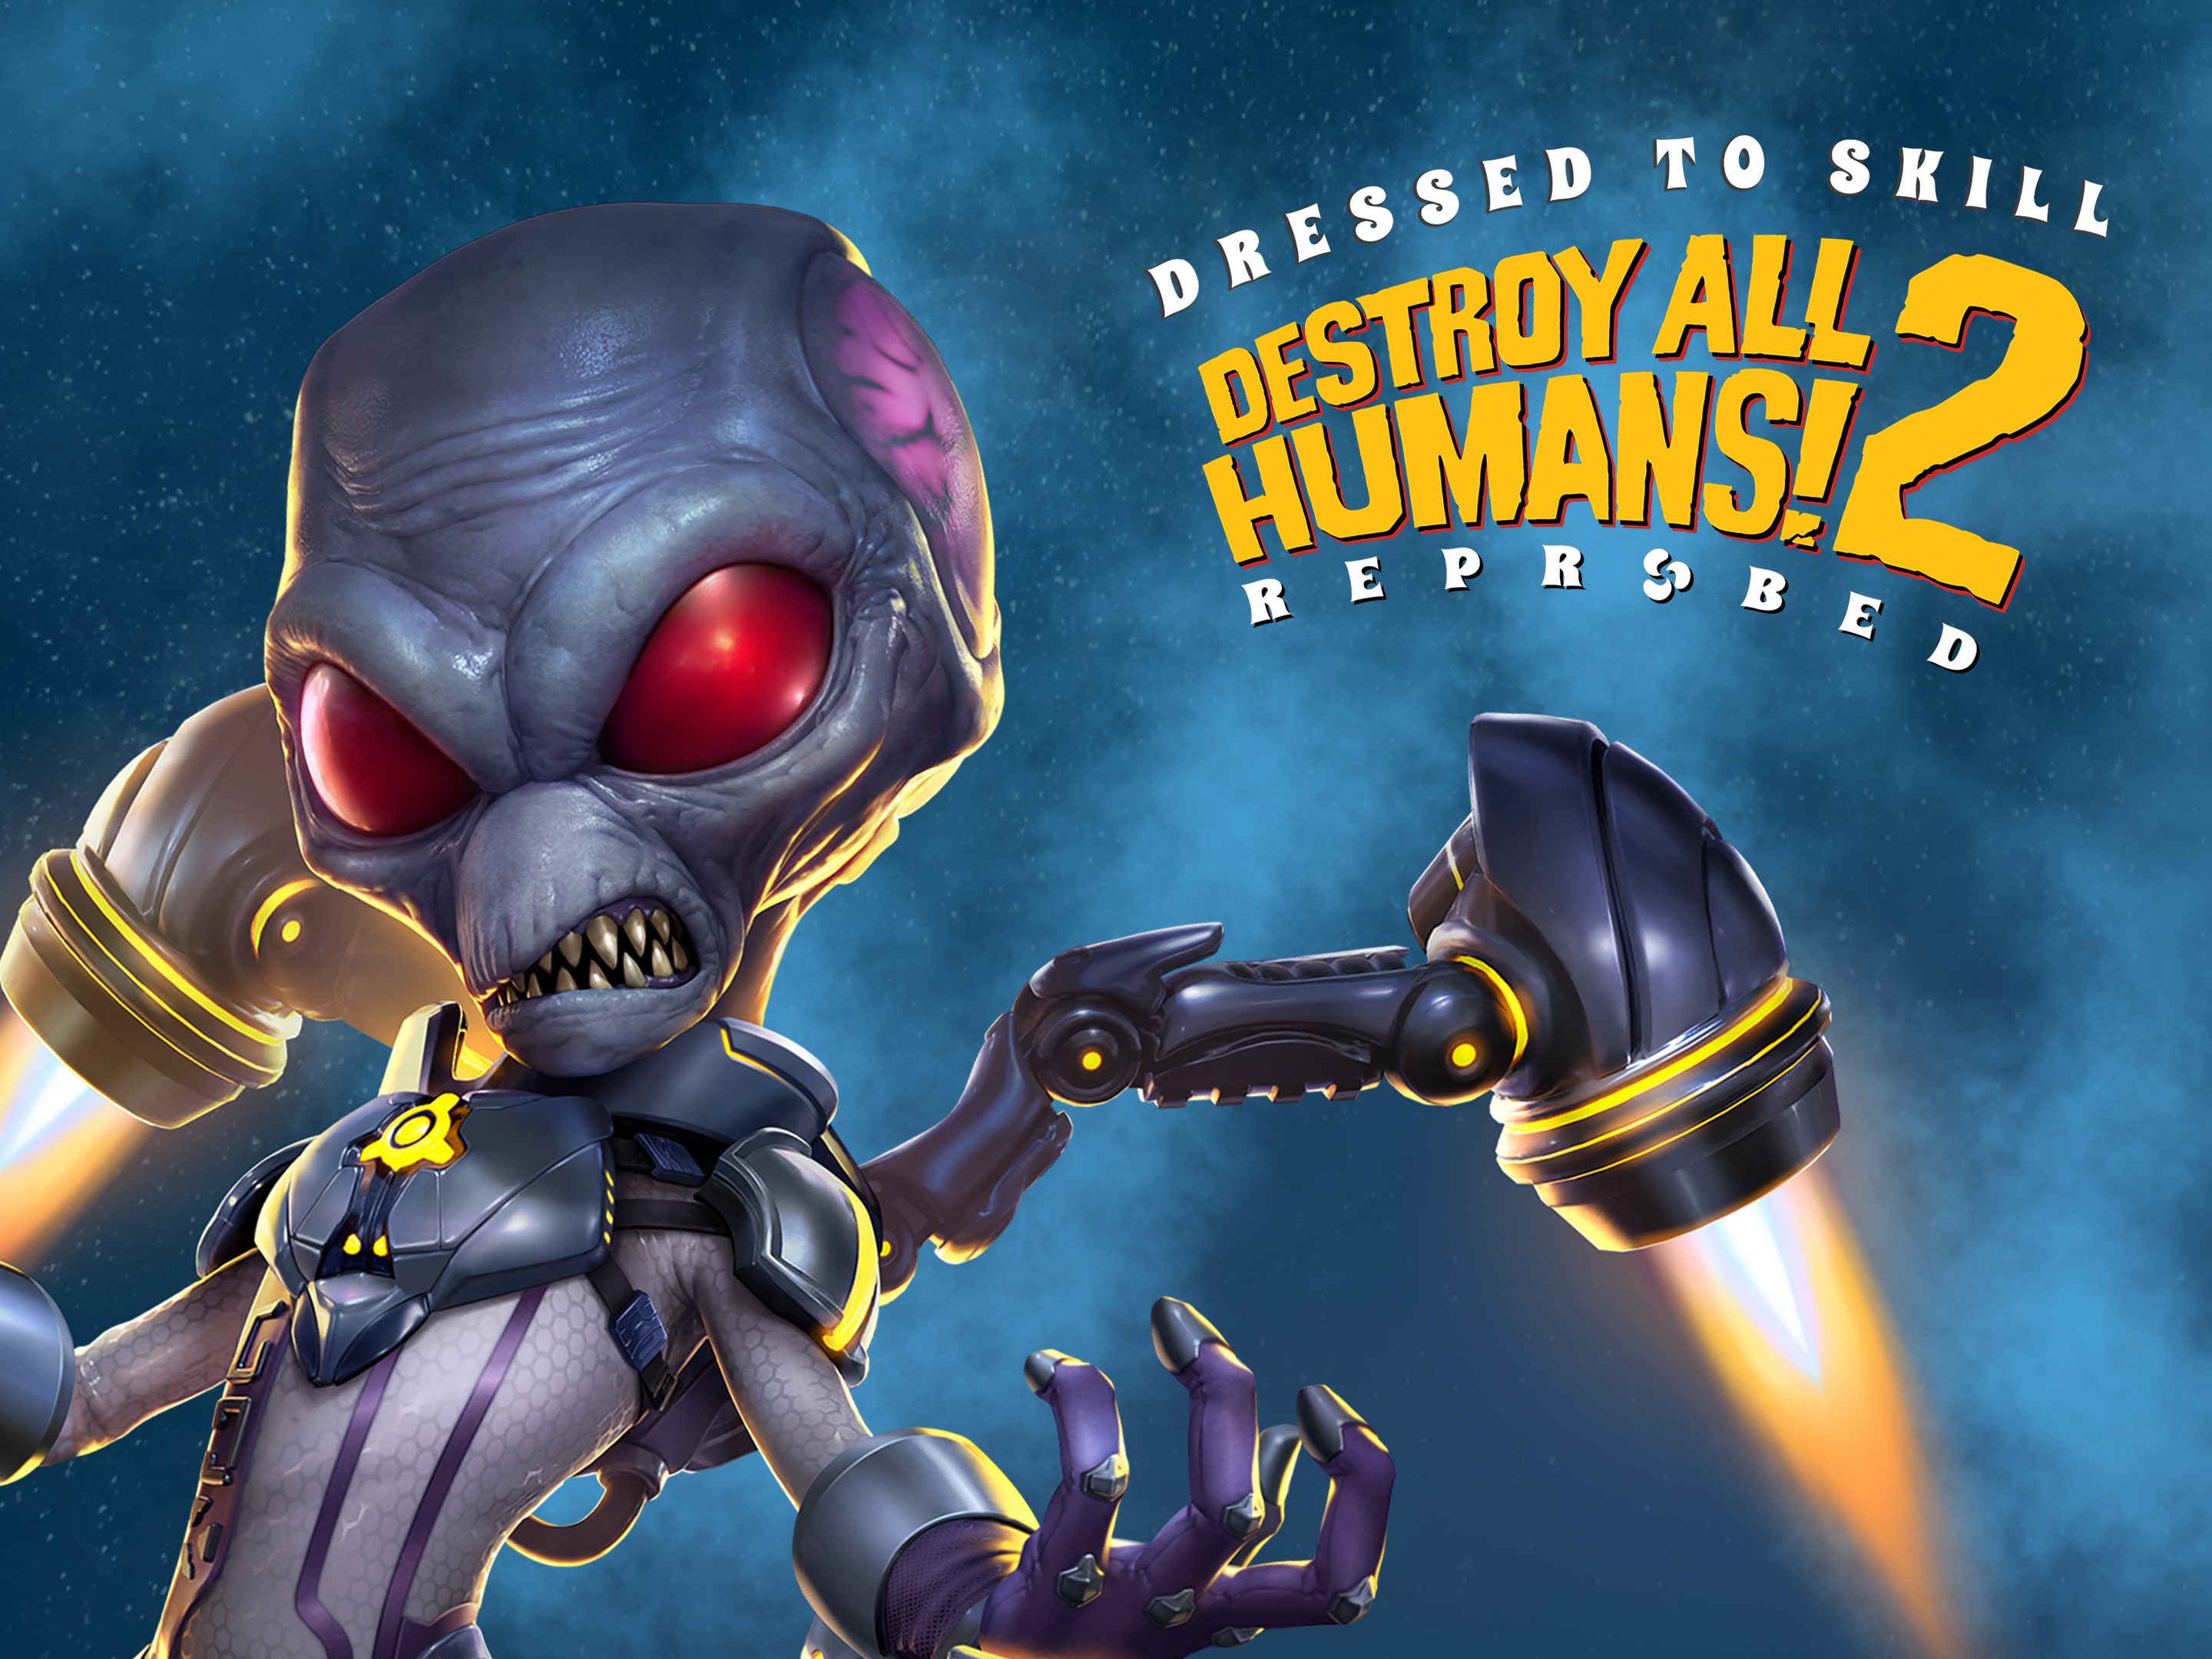 Supermarked Dejlig national flag Destroy All Humans! 2 - Reprobed: Dressed to Skill Edition